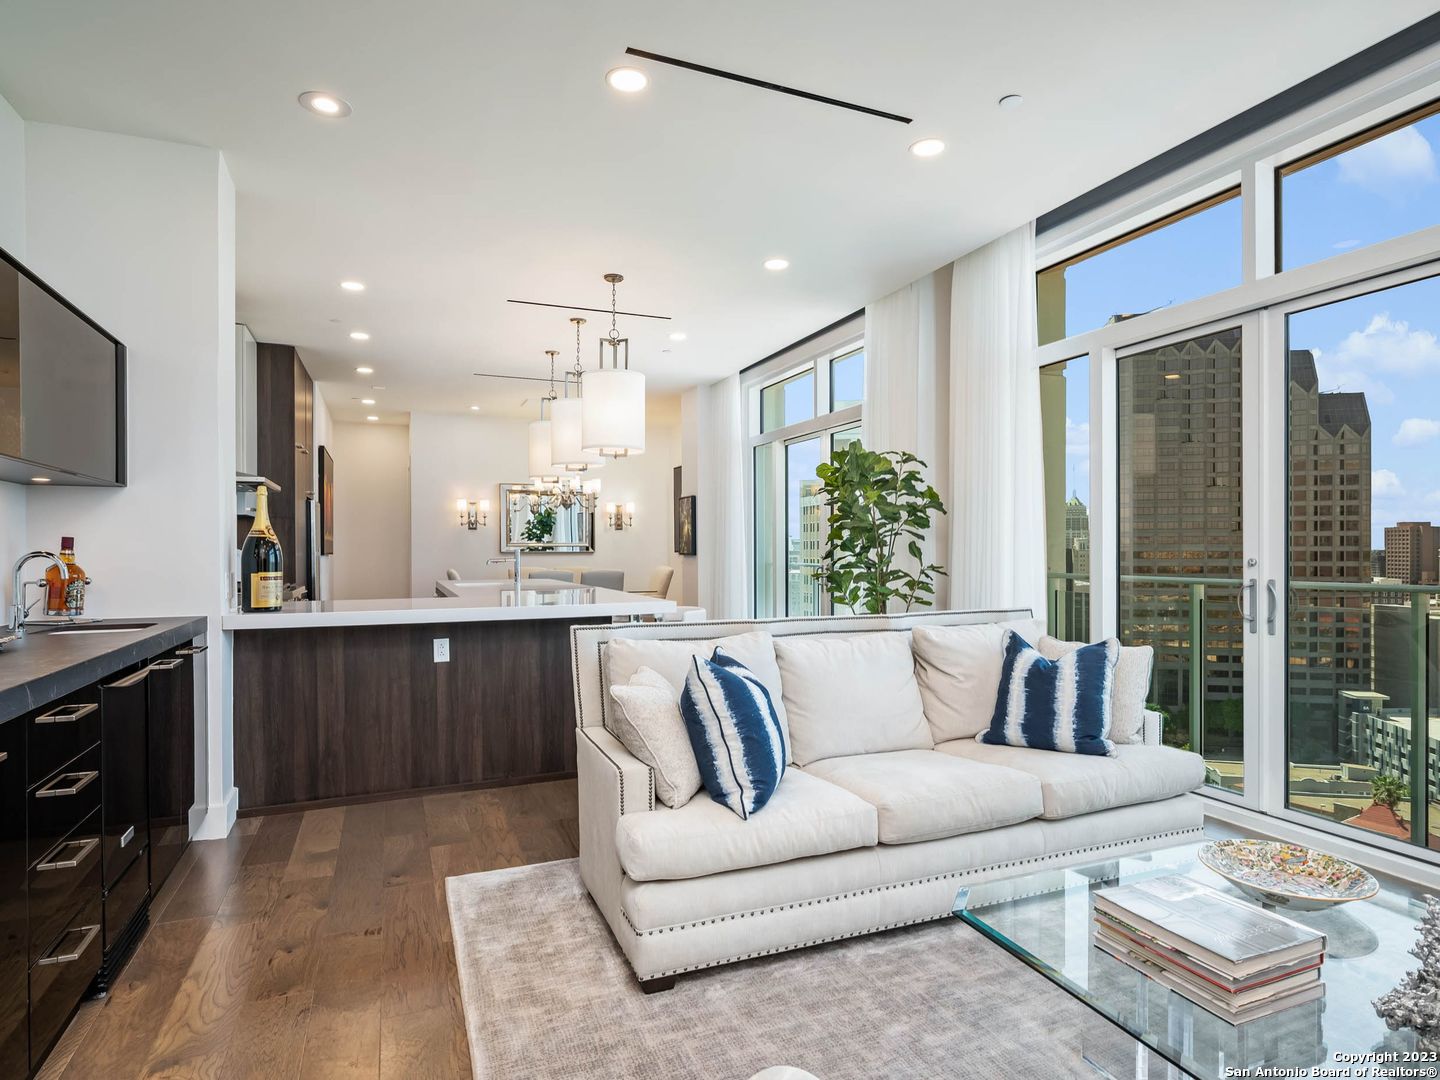 This customized residence has phenomenal downtown views through the floor-to-ceiling glass with sliding doors. With 10 ft ceilings, this 2 BD | 2.5 BA | 1,694 SF Cezanne floor plan is loaded with upgrades. The space is inviting and ready to host, with a wet bar, wine refrigerator and ice maker in the living room bar. The chef's kitchen has a grand island with thick quartz countertops, a pullout pantry, high-end Thermador gas stove, and to-the-ceiling cabinetry with upgraded hardware. Custom finishes include light fixtures, motorized shades, and curtains. The owner's suite has great views and customized closets. This residence is being offered fully furnished, if desired. Located above the Thompson Hotel, amenities like 24-hour concierge, valet parking, and optional housekeeping and linen service offer a low-maintenance lifestyle. Residents have full access to the Thompson pool with cabanas, bar, and cafe. The hotel spa has a steam room and sauna and offers in-home massages. Other services available include dog walking, car detailing, personal shopping, housekeeping, linen service, and dry cleaning. While LandRace offers riverside seating downstairs, The Moon's Daughters has rooftop dining and cocktails upstairs. Located on a quiet part of the river next to The Tobin Center for the Performing Arts, residents enjoy preferred access and ticket purchases to all shows at The Tobin. Come experience The Art of Living Beautifully.